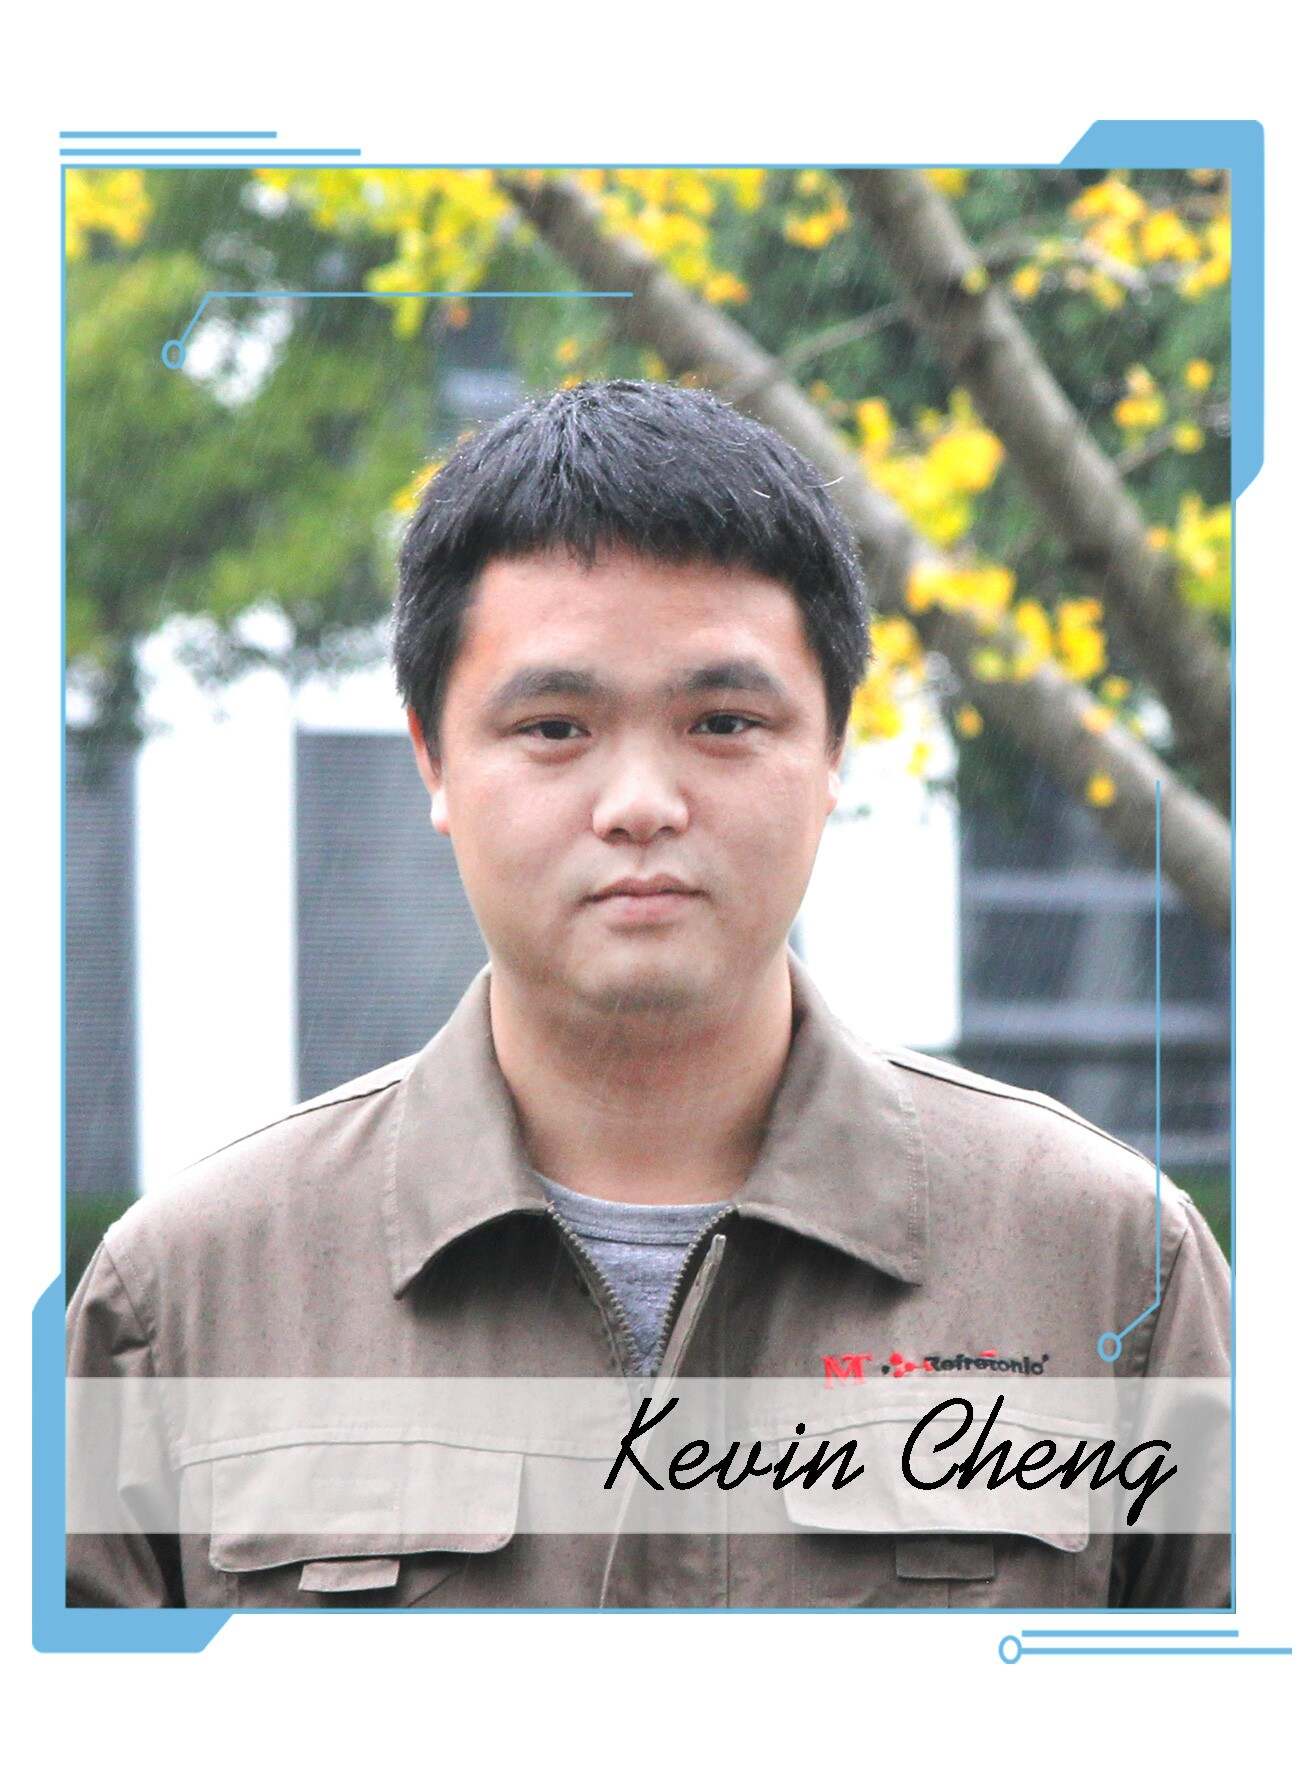 Kevin Chen